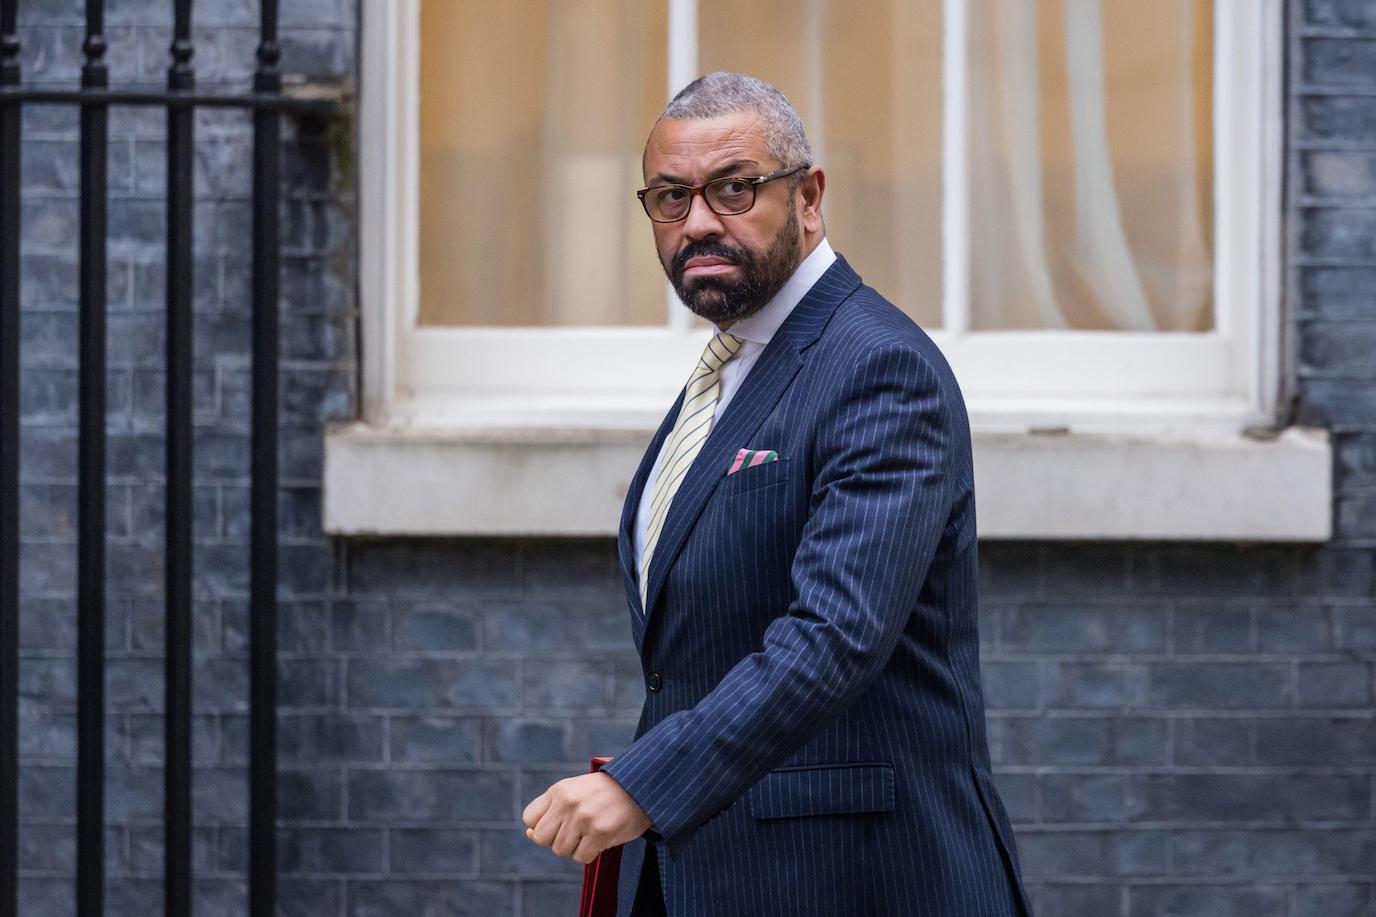 James Cleverly says MPs must not feel ‘bullied’ as government mulls protest rule changes - Politics.co.uk